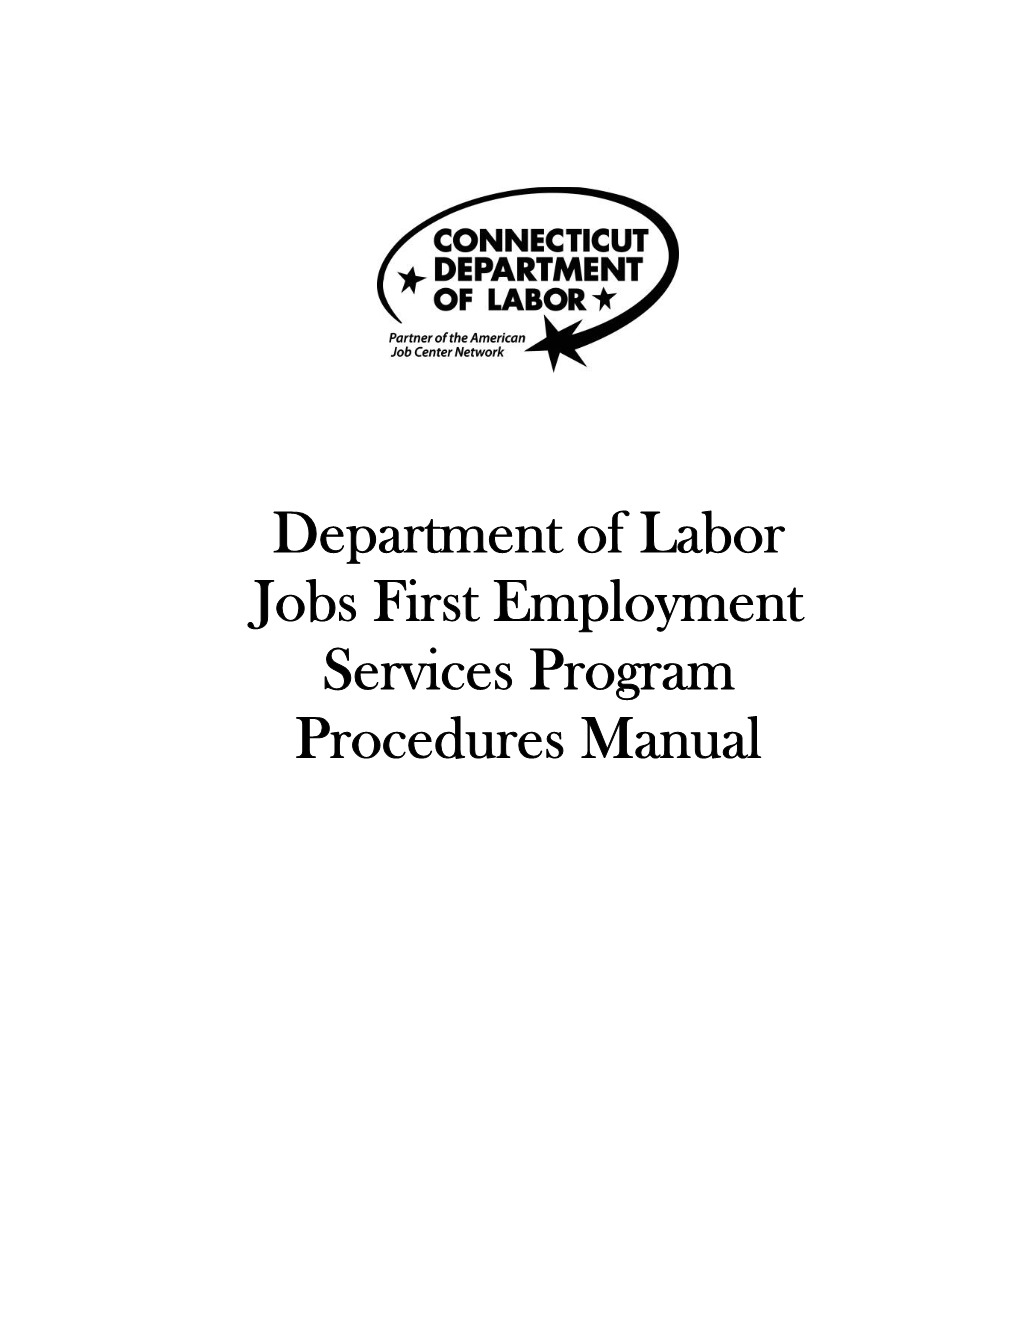 Department of Labor Jobs First Employment Services Program Procedures Manual